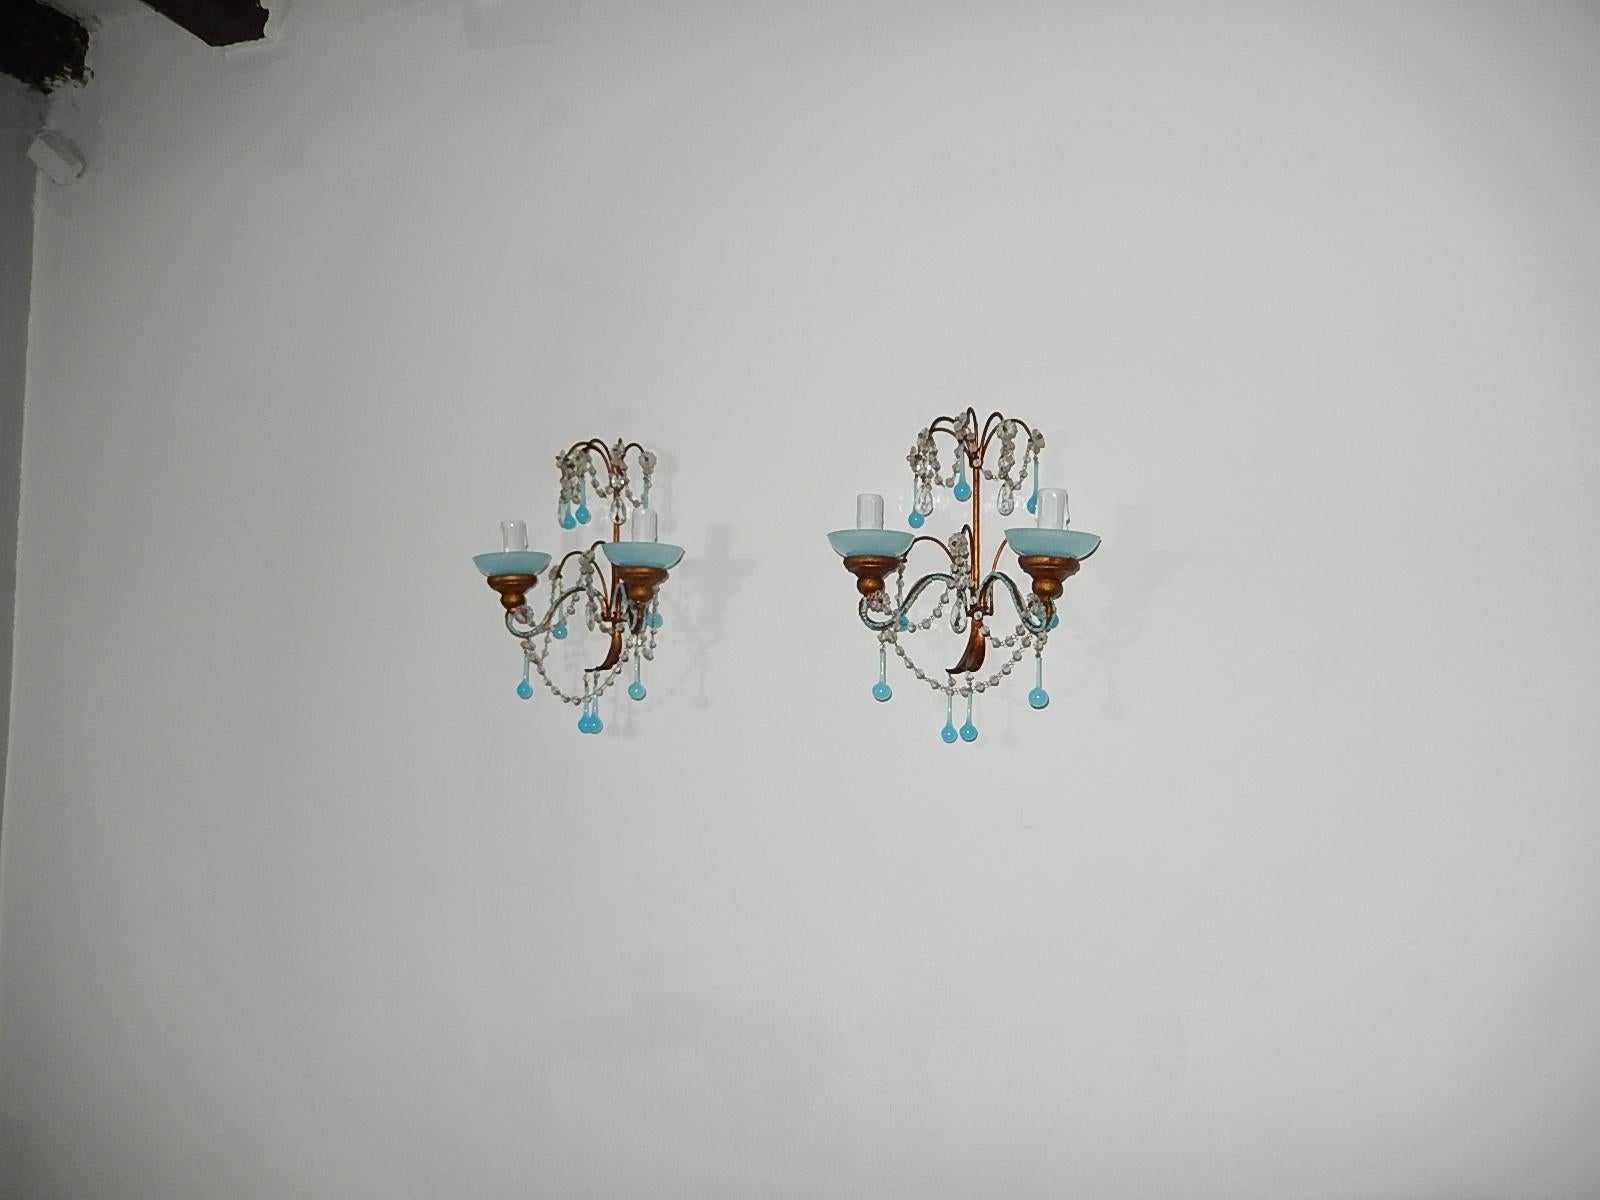 French Aqua Blue Opaline Drops Bead Bobeches Rock Crystal Sconces For Sale 6